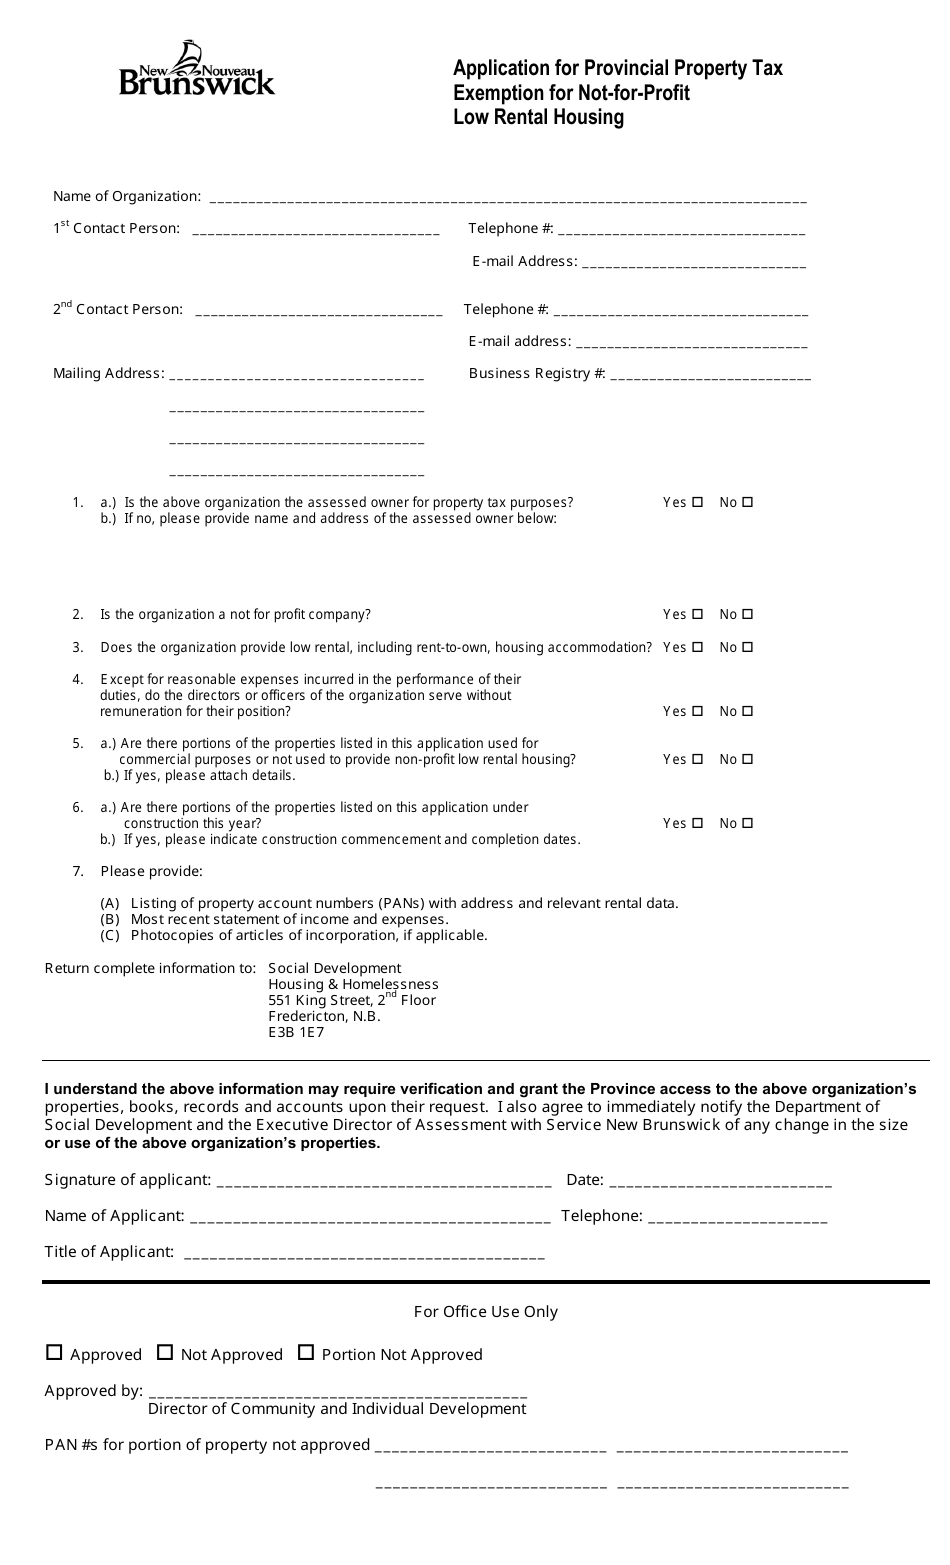 Application for Provincial Property Tax Exemption for Not-For-Profit Low Rental Housing - New Brunswick, Canada, Page 1